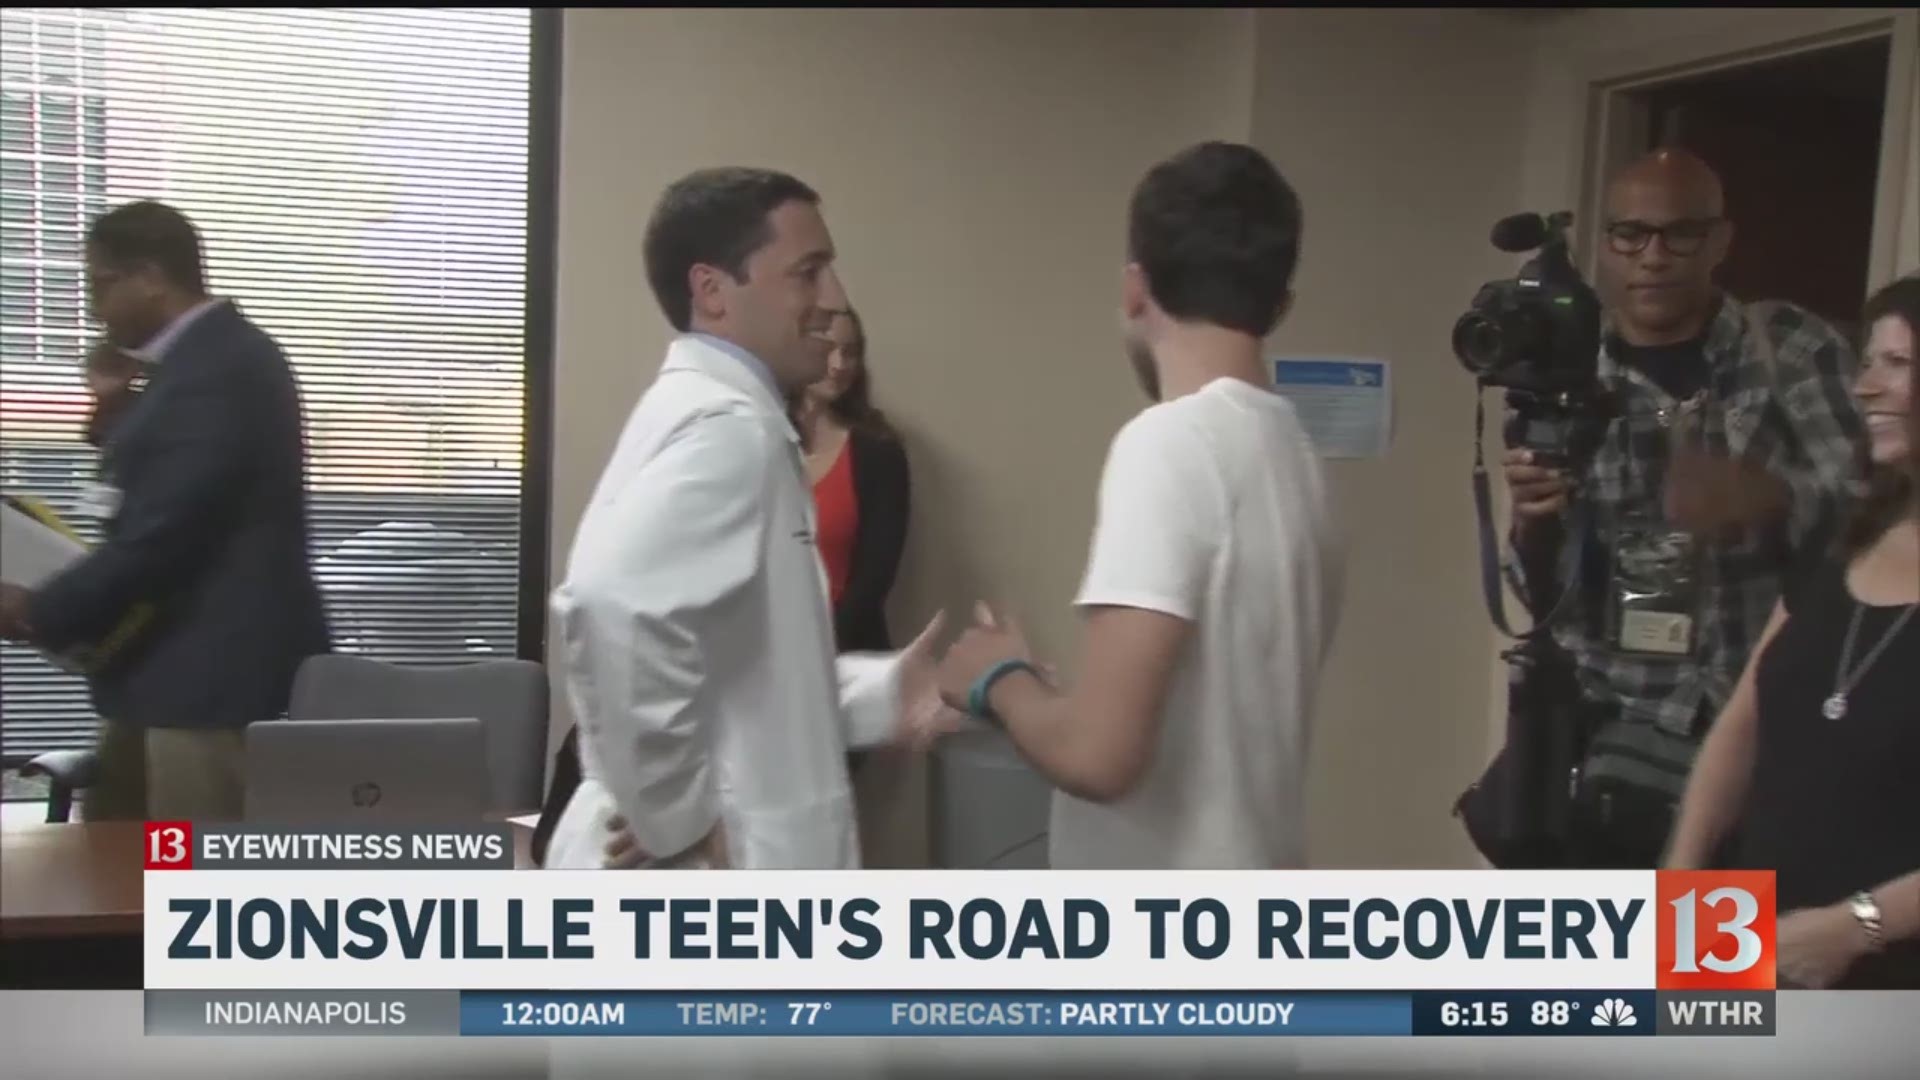 Zionsville teen's road to recovery